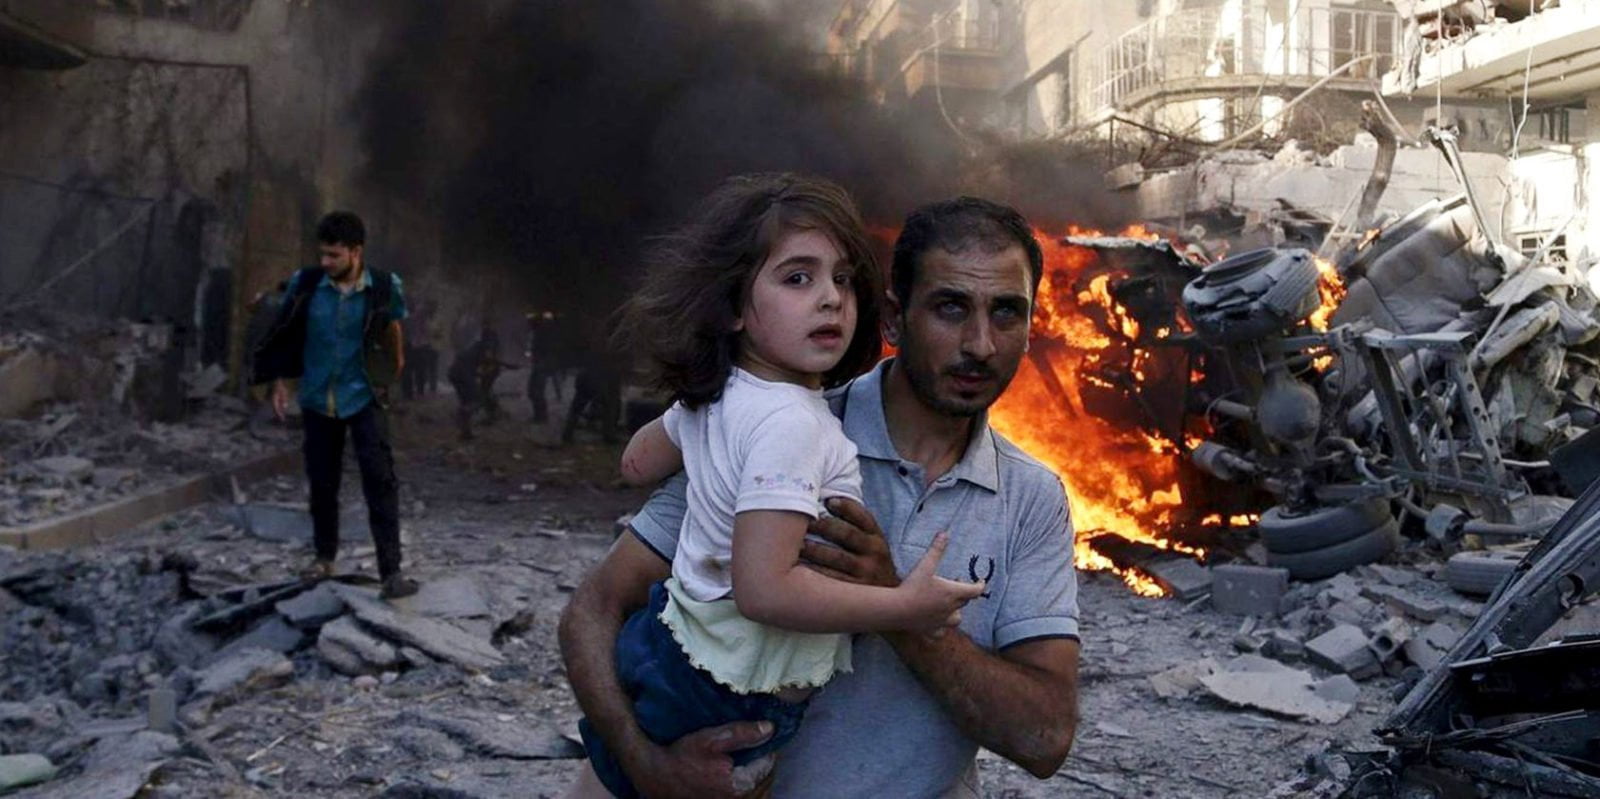 A man carries a young girl through rubble in Syria.